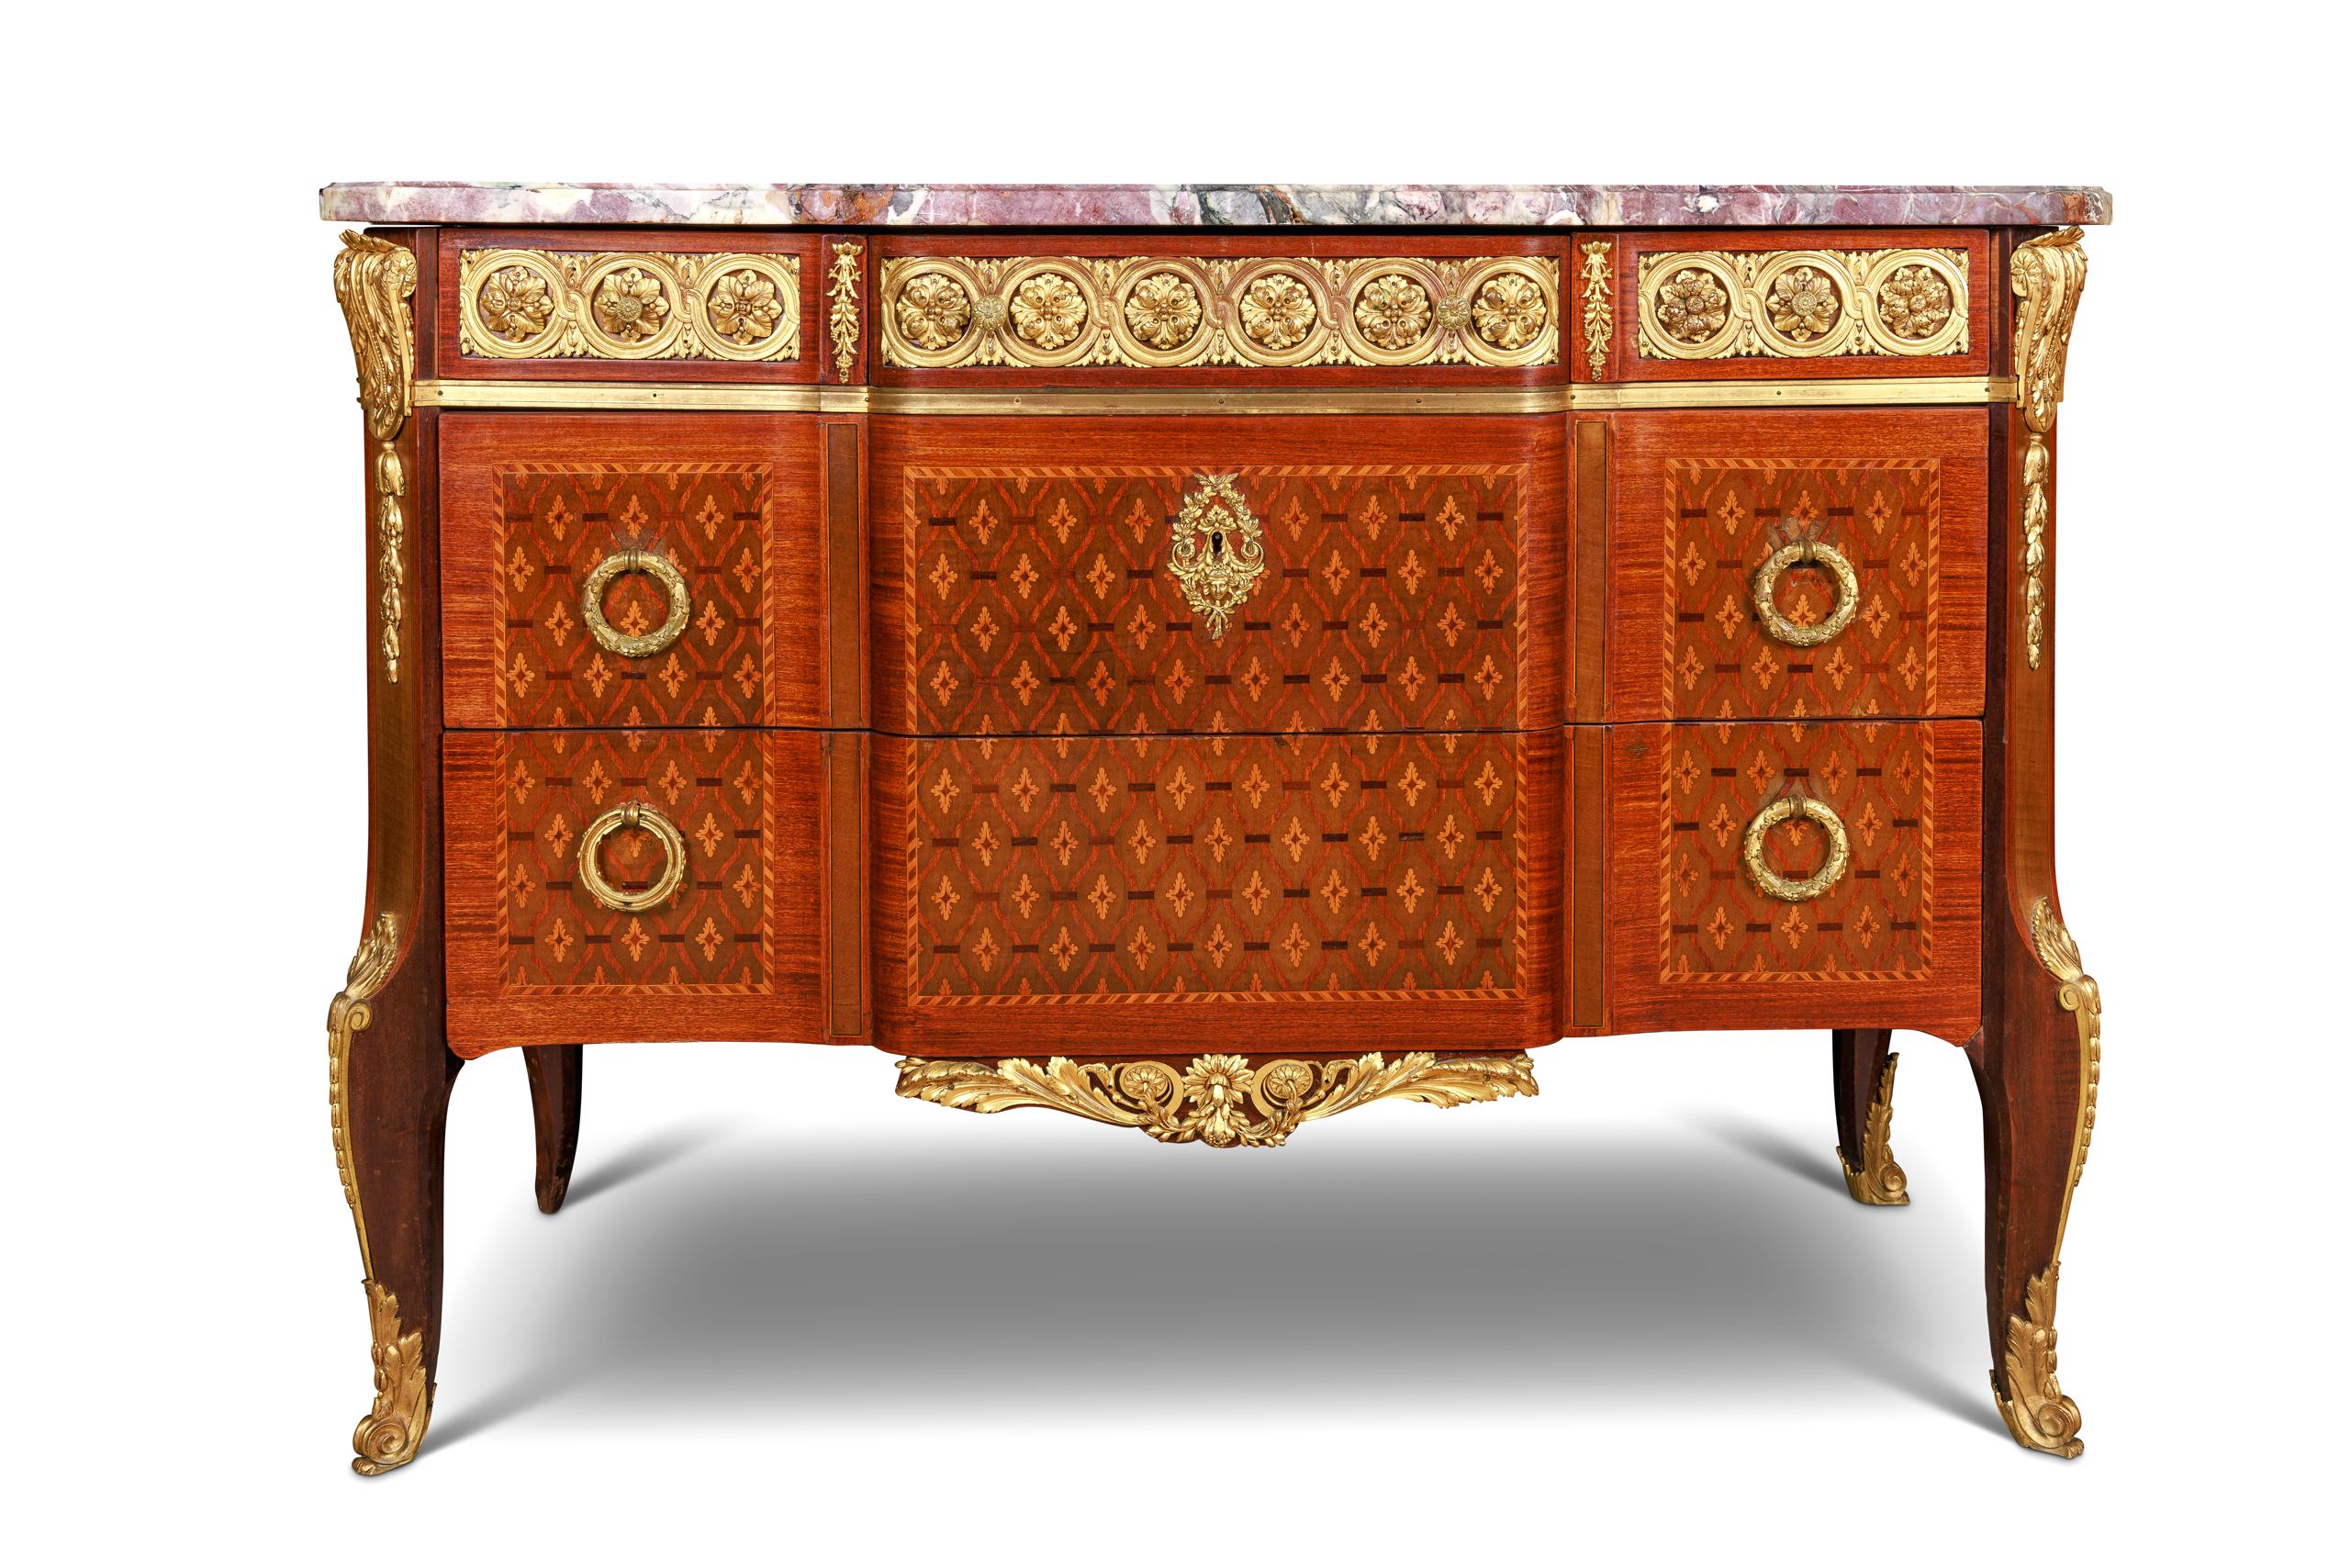 A French Louis XVI Style Ormolu-mounted marquetry and parquetry commode, circa 1875.

A very fine French 19th century finely chased ormolu-mounted kingwood, tulipwood, and satinwood marquetry and parquetry commode with original Breche Violette